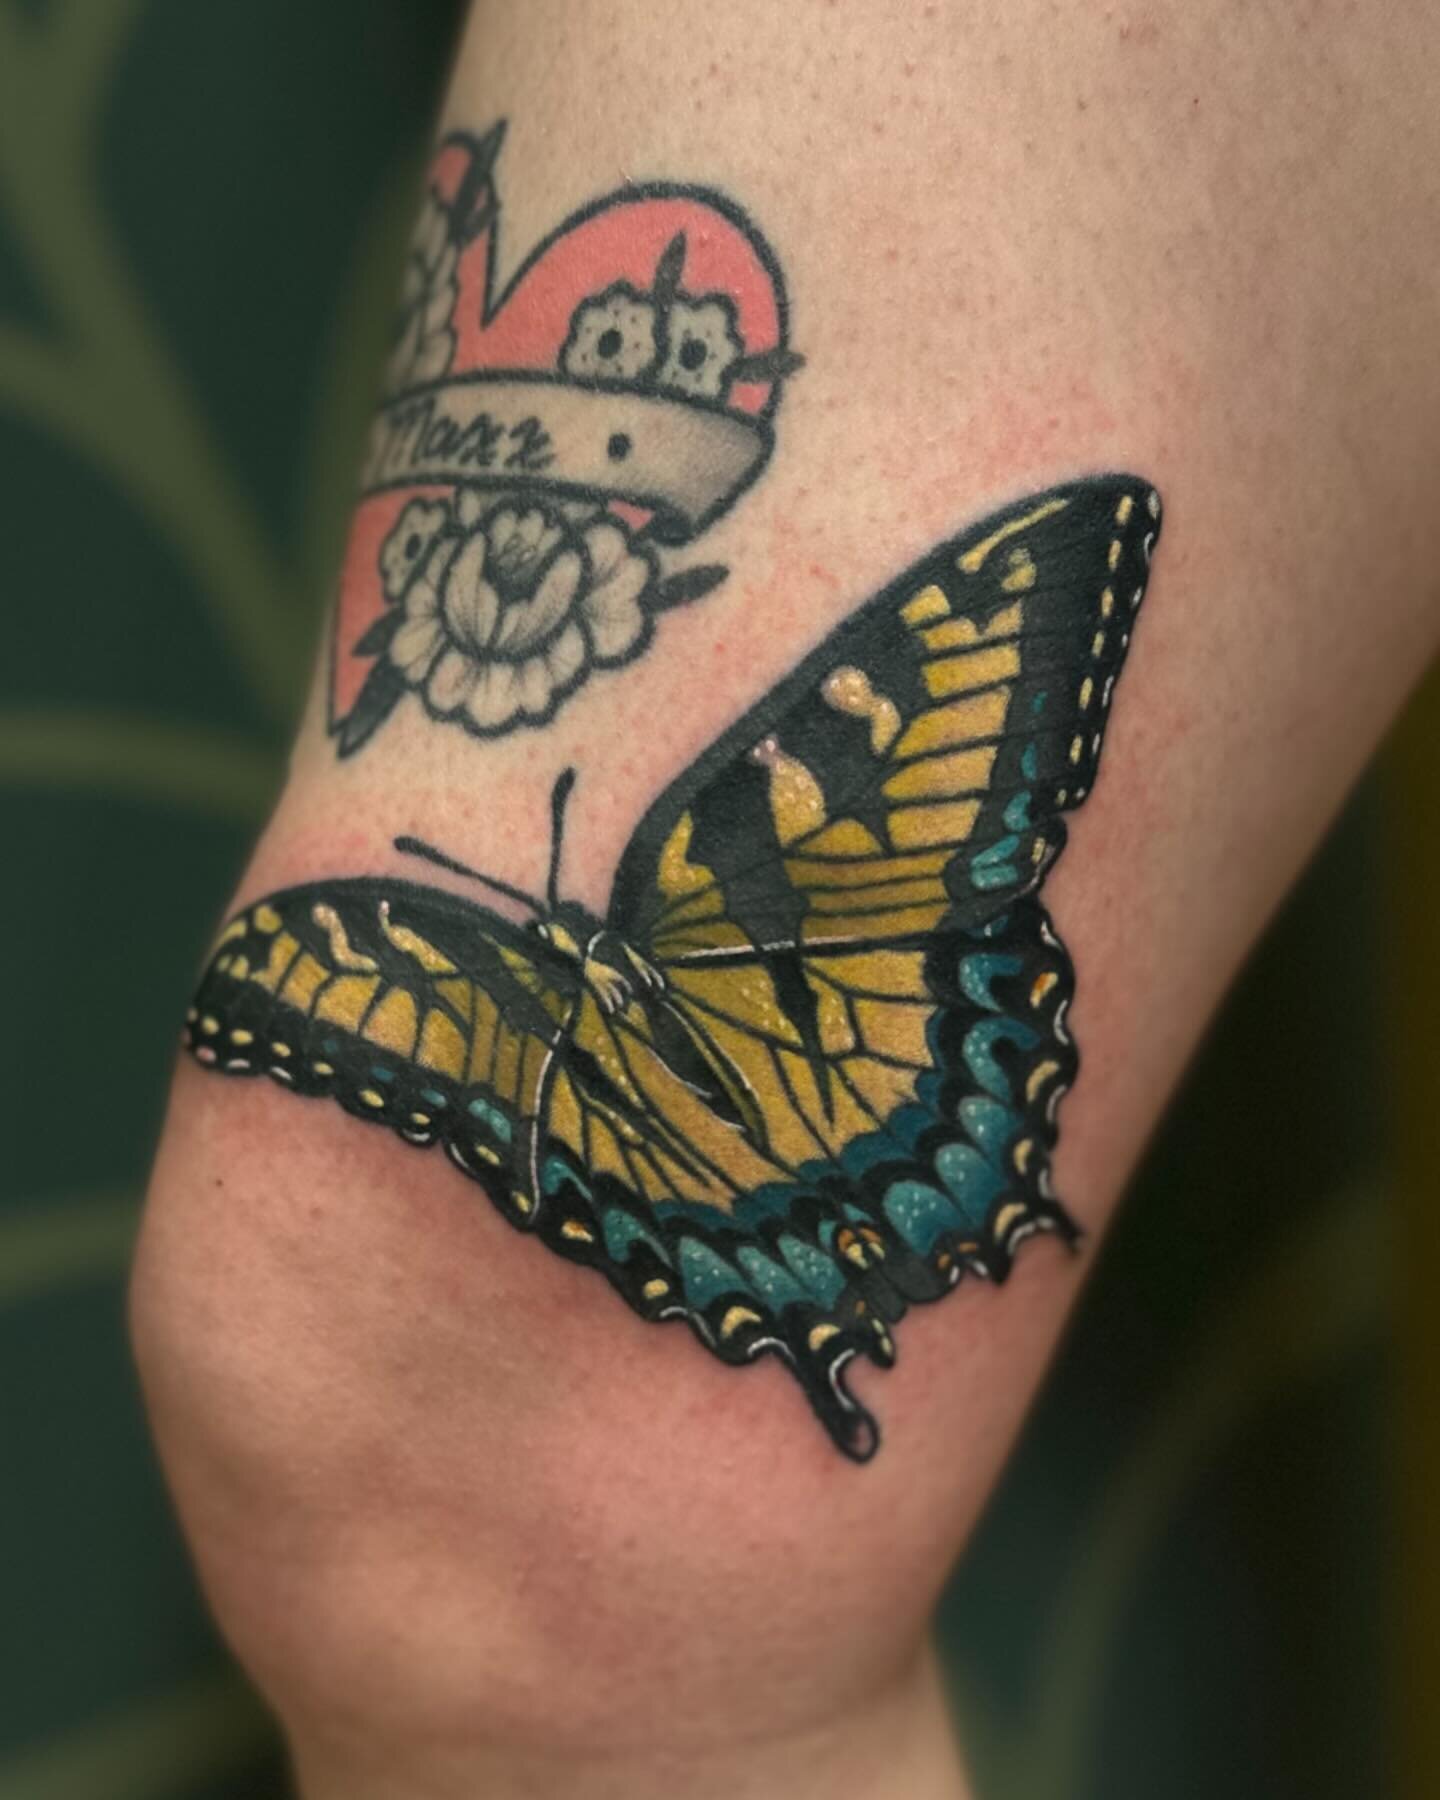 A pretty swallowtail butterfly for my work wife @janinetattoos a little swollen in this pic, lines healed color fresh~
Thanks for toughing out this tendy spot and having good chats with me always💚 Love you, Janine!!✨
.
Next to a healed piece by our 